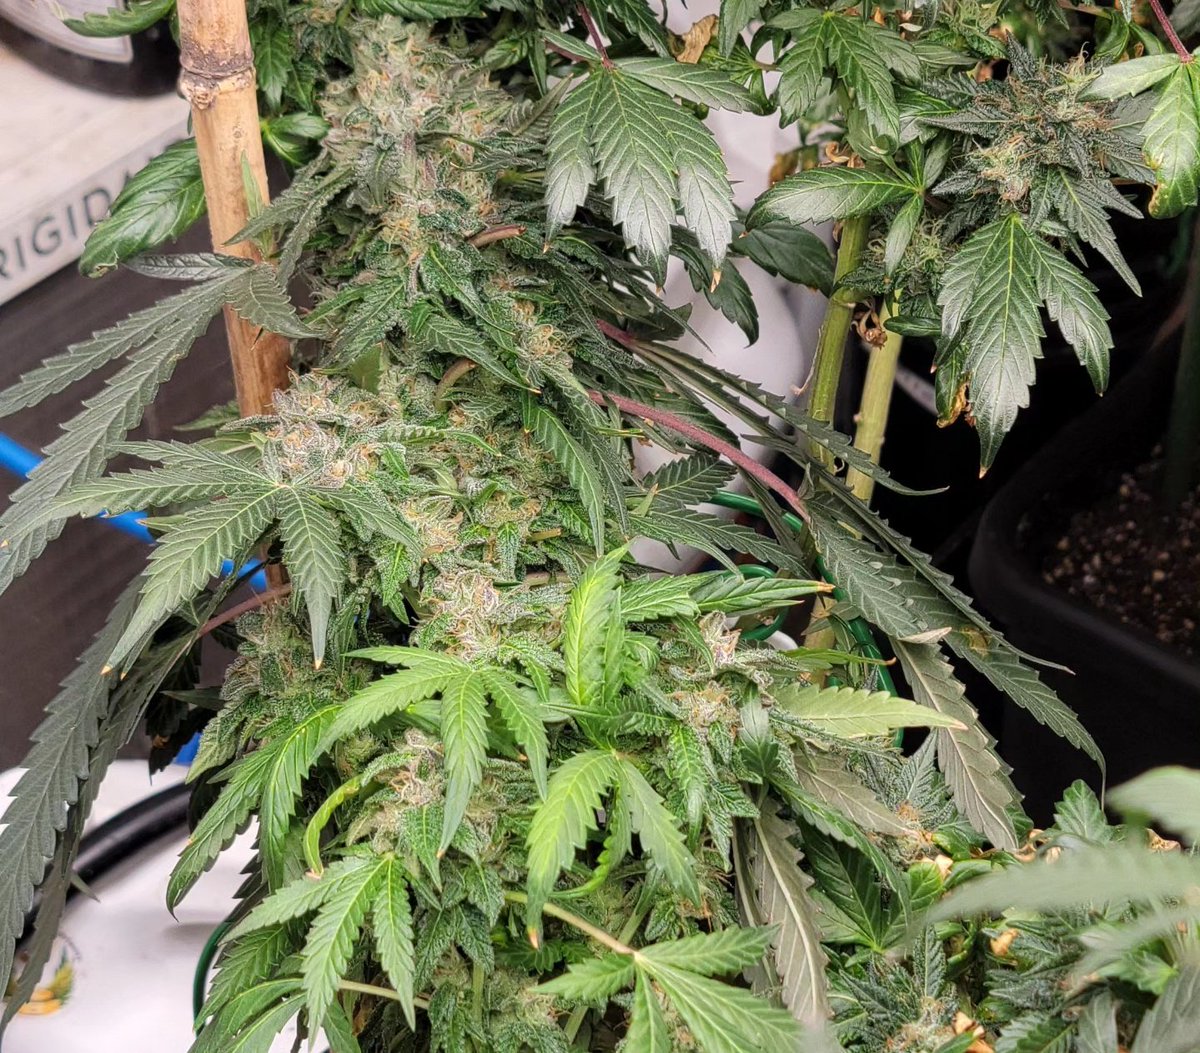 My Gelato runtz comming along 2 of 12 have been chopped 🔪 the rest probly another week I'm thinking 
#fce3000 
#Fc1000
#ts1000
#ANgrown 
#autopot 
#marshydro 

Grown in 
#autopot 
With
#advancednutrients 
Under a
#fc1000w
With
#promixhp